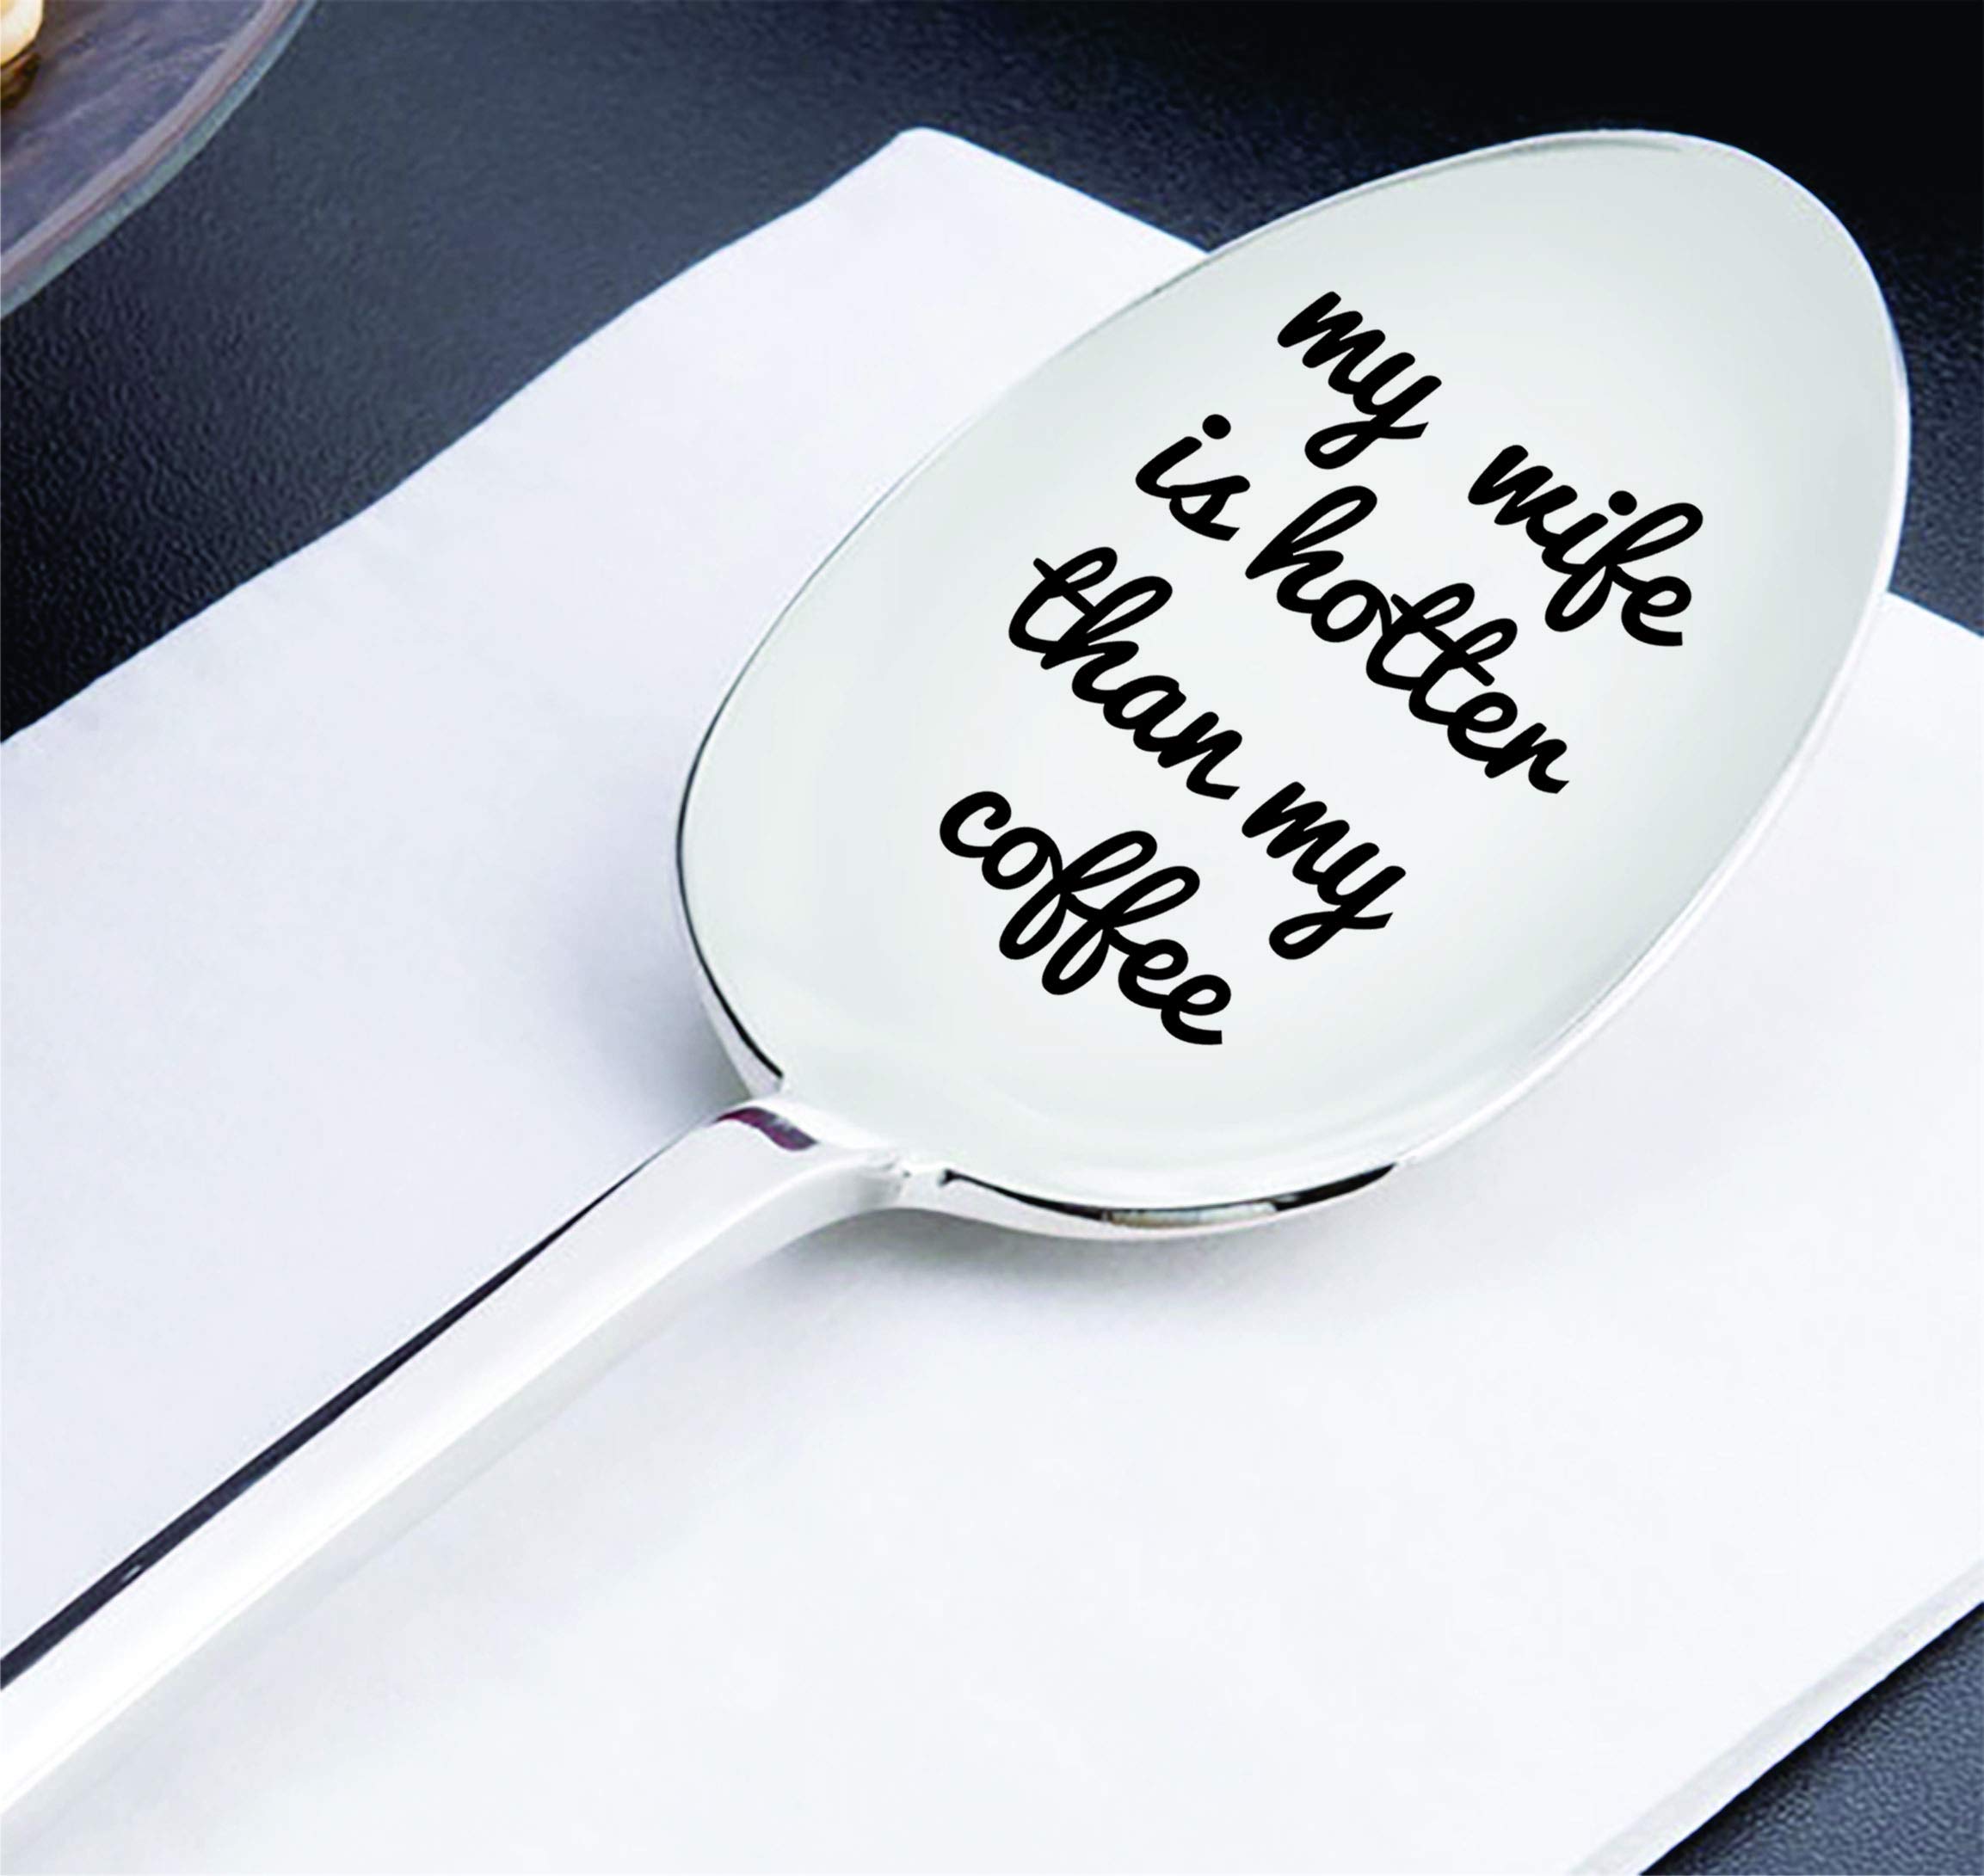 Wife Gift - My Wife is Hotter Than My Coffee Engraved Spoon for Women | Wedding Gift for Wife from Husband | Christmas / Valentines Day / Birthday Gift/ Present for Her - 7 Inch Stainless Steel Spoon